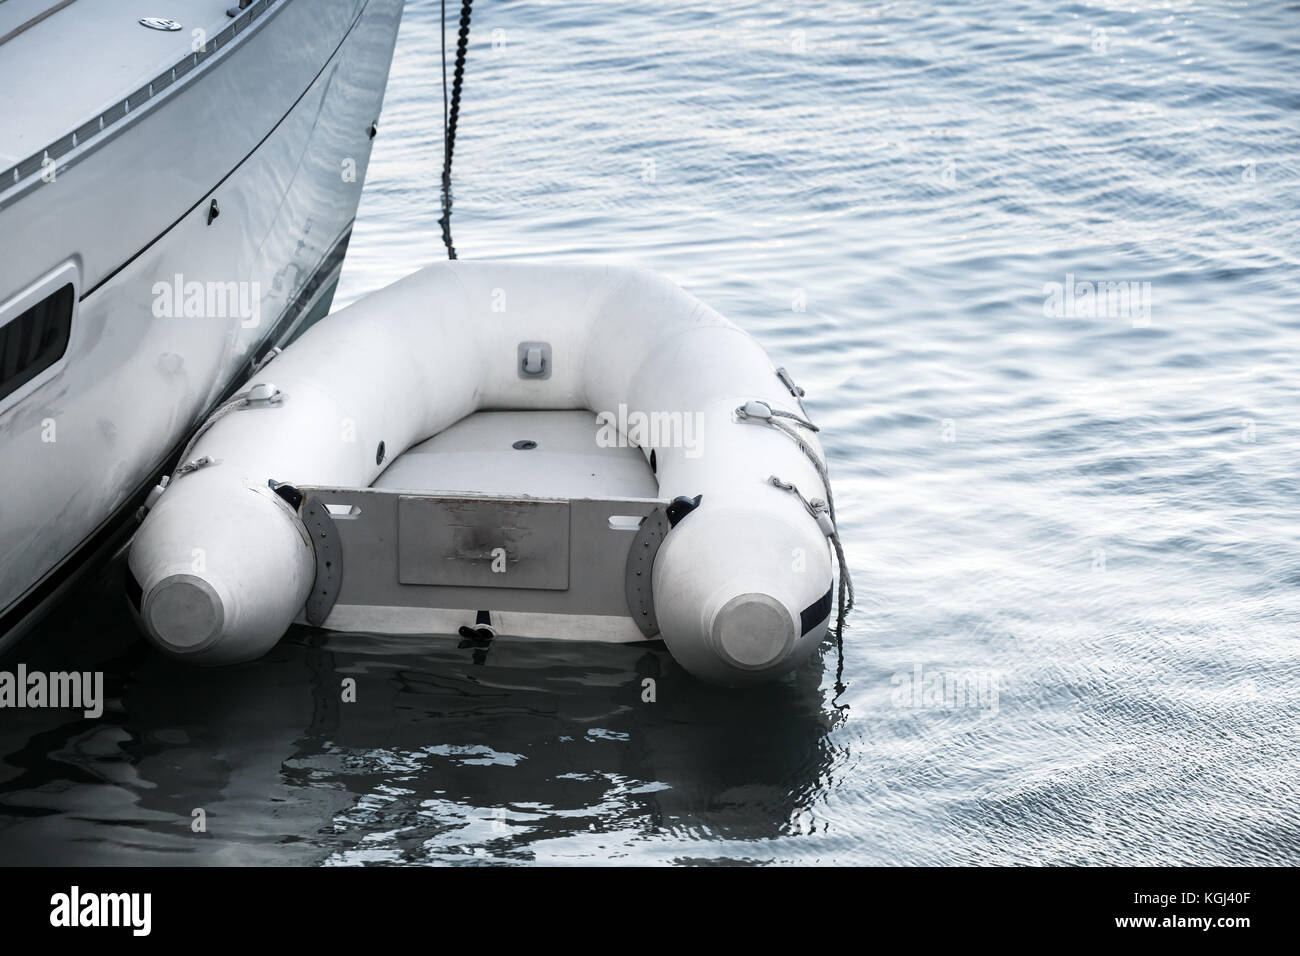 Small white inflatable boat floating near a yacht Stock Photo